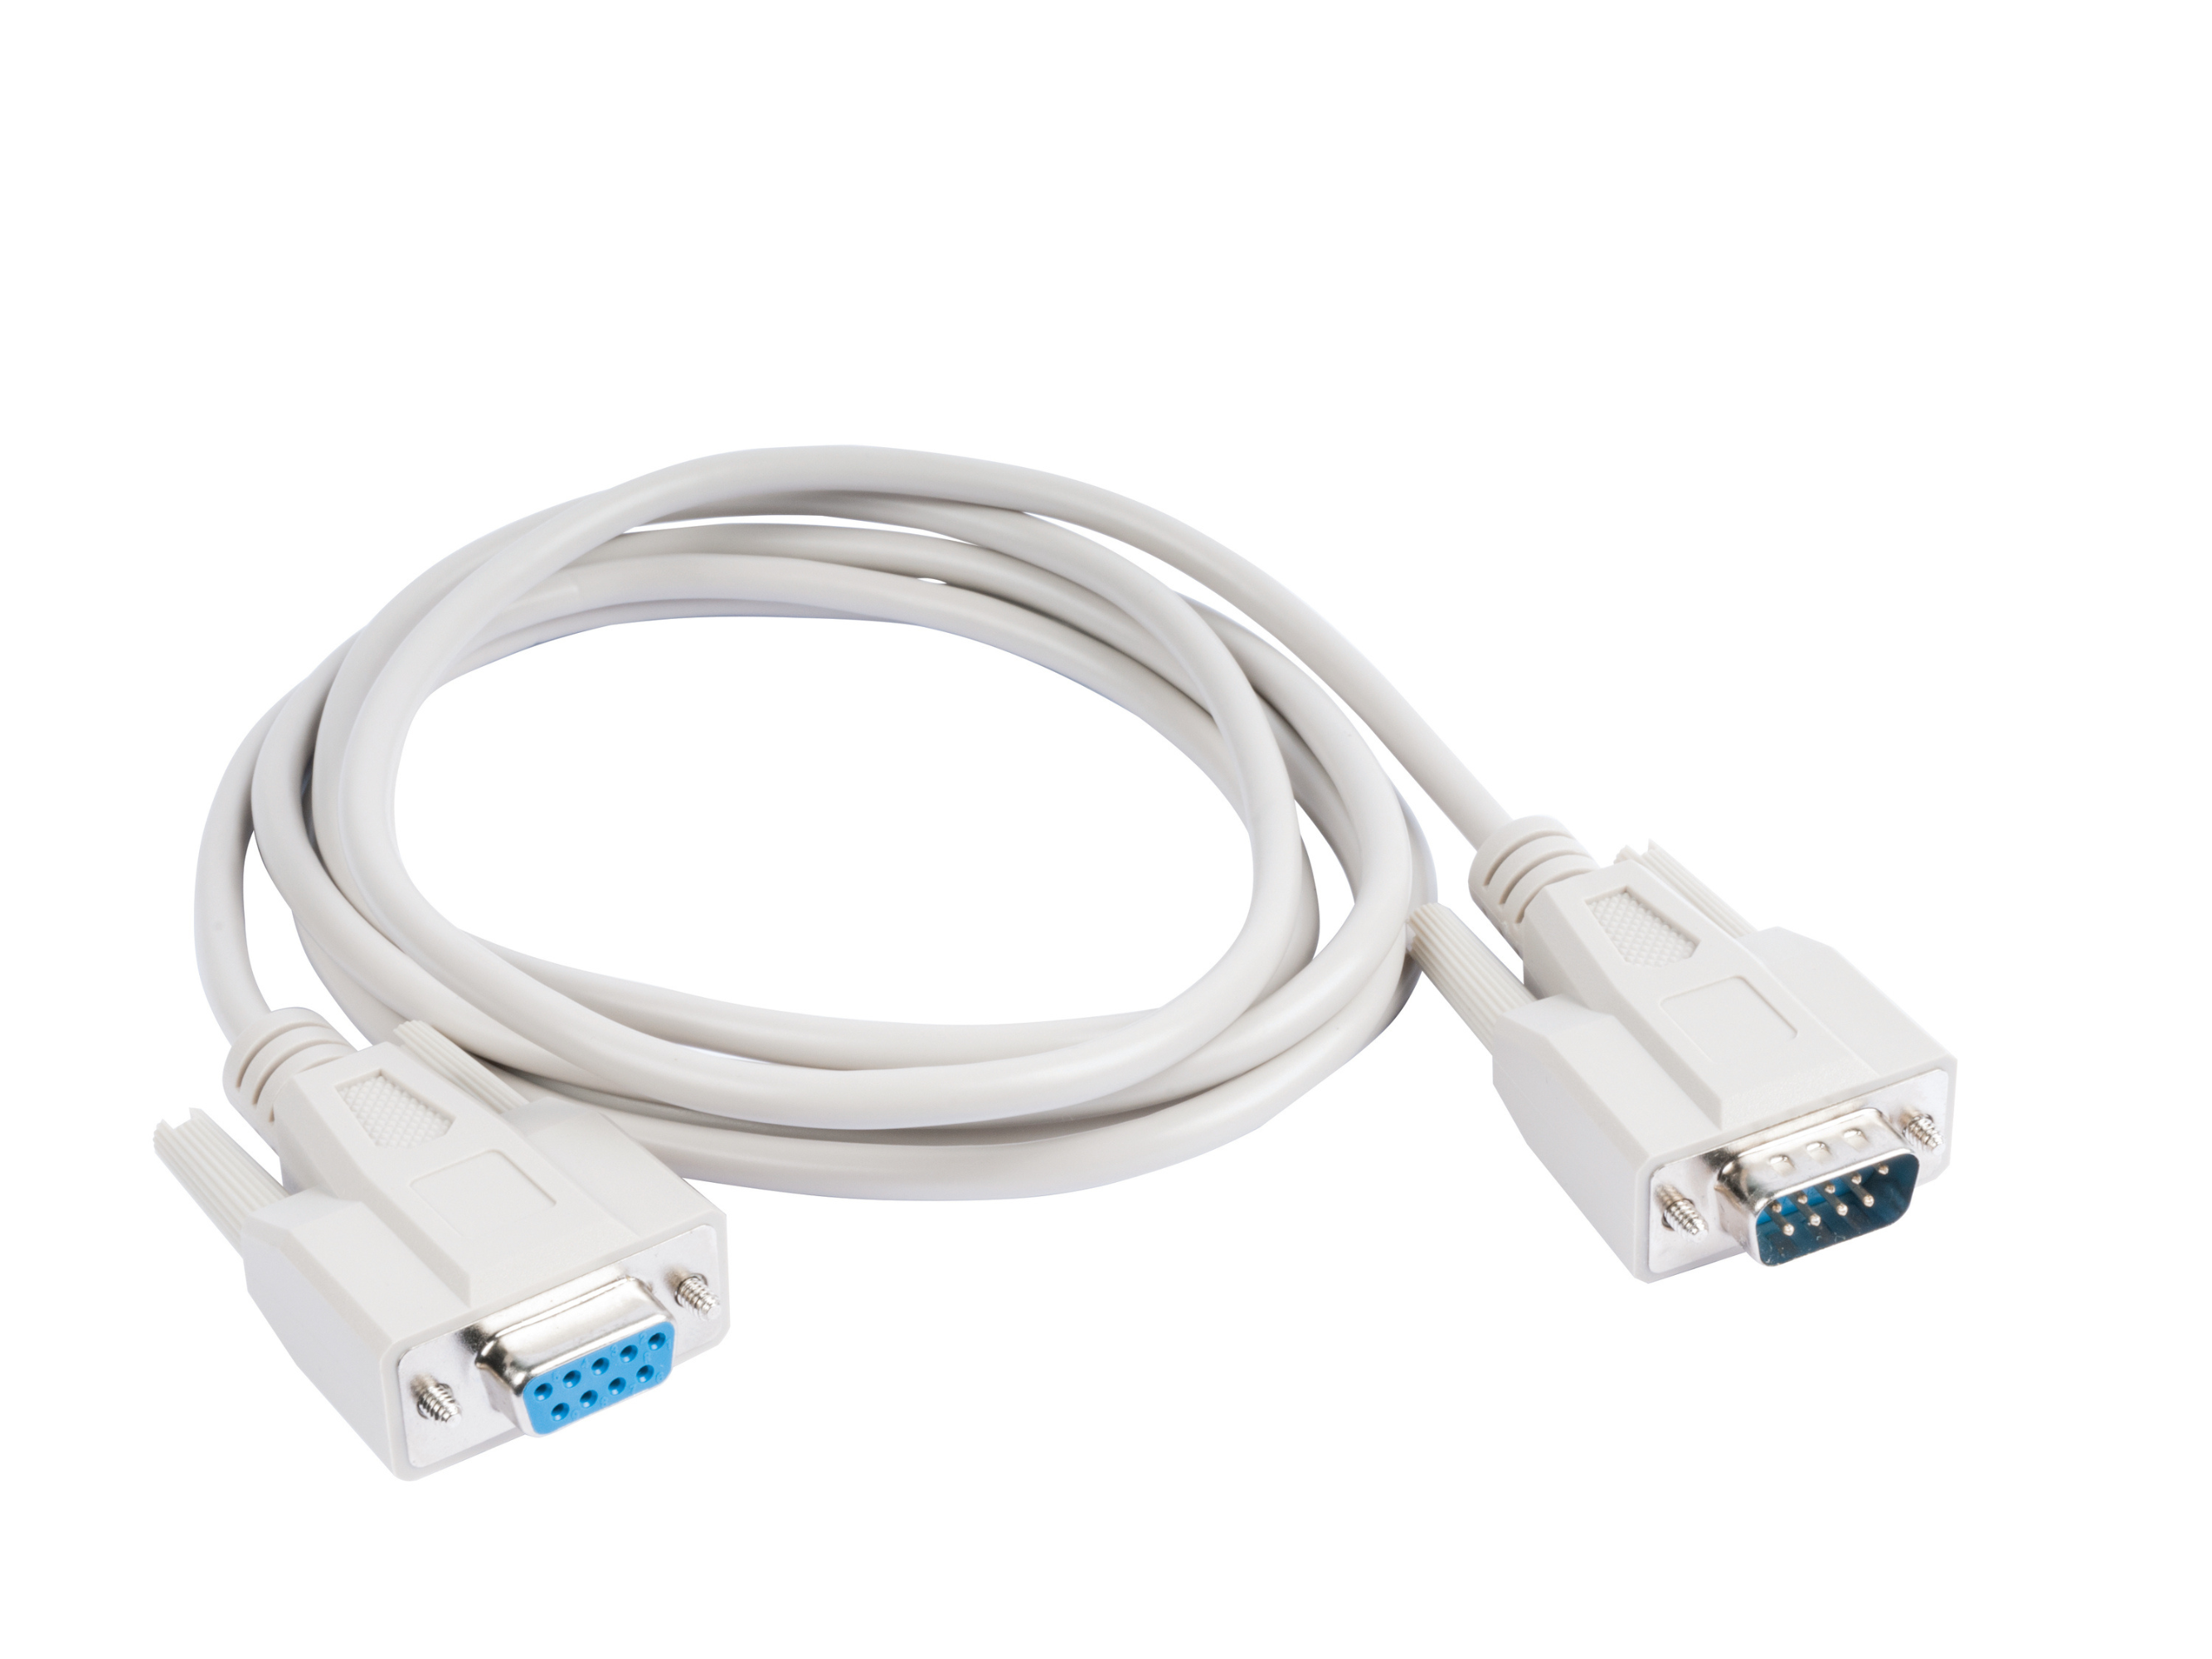 Tesa Sub-D 9p/m to USB cable, 2 m 04761063